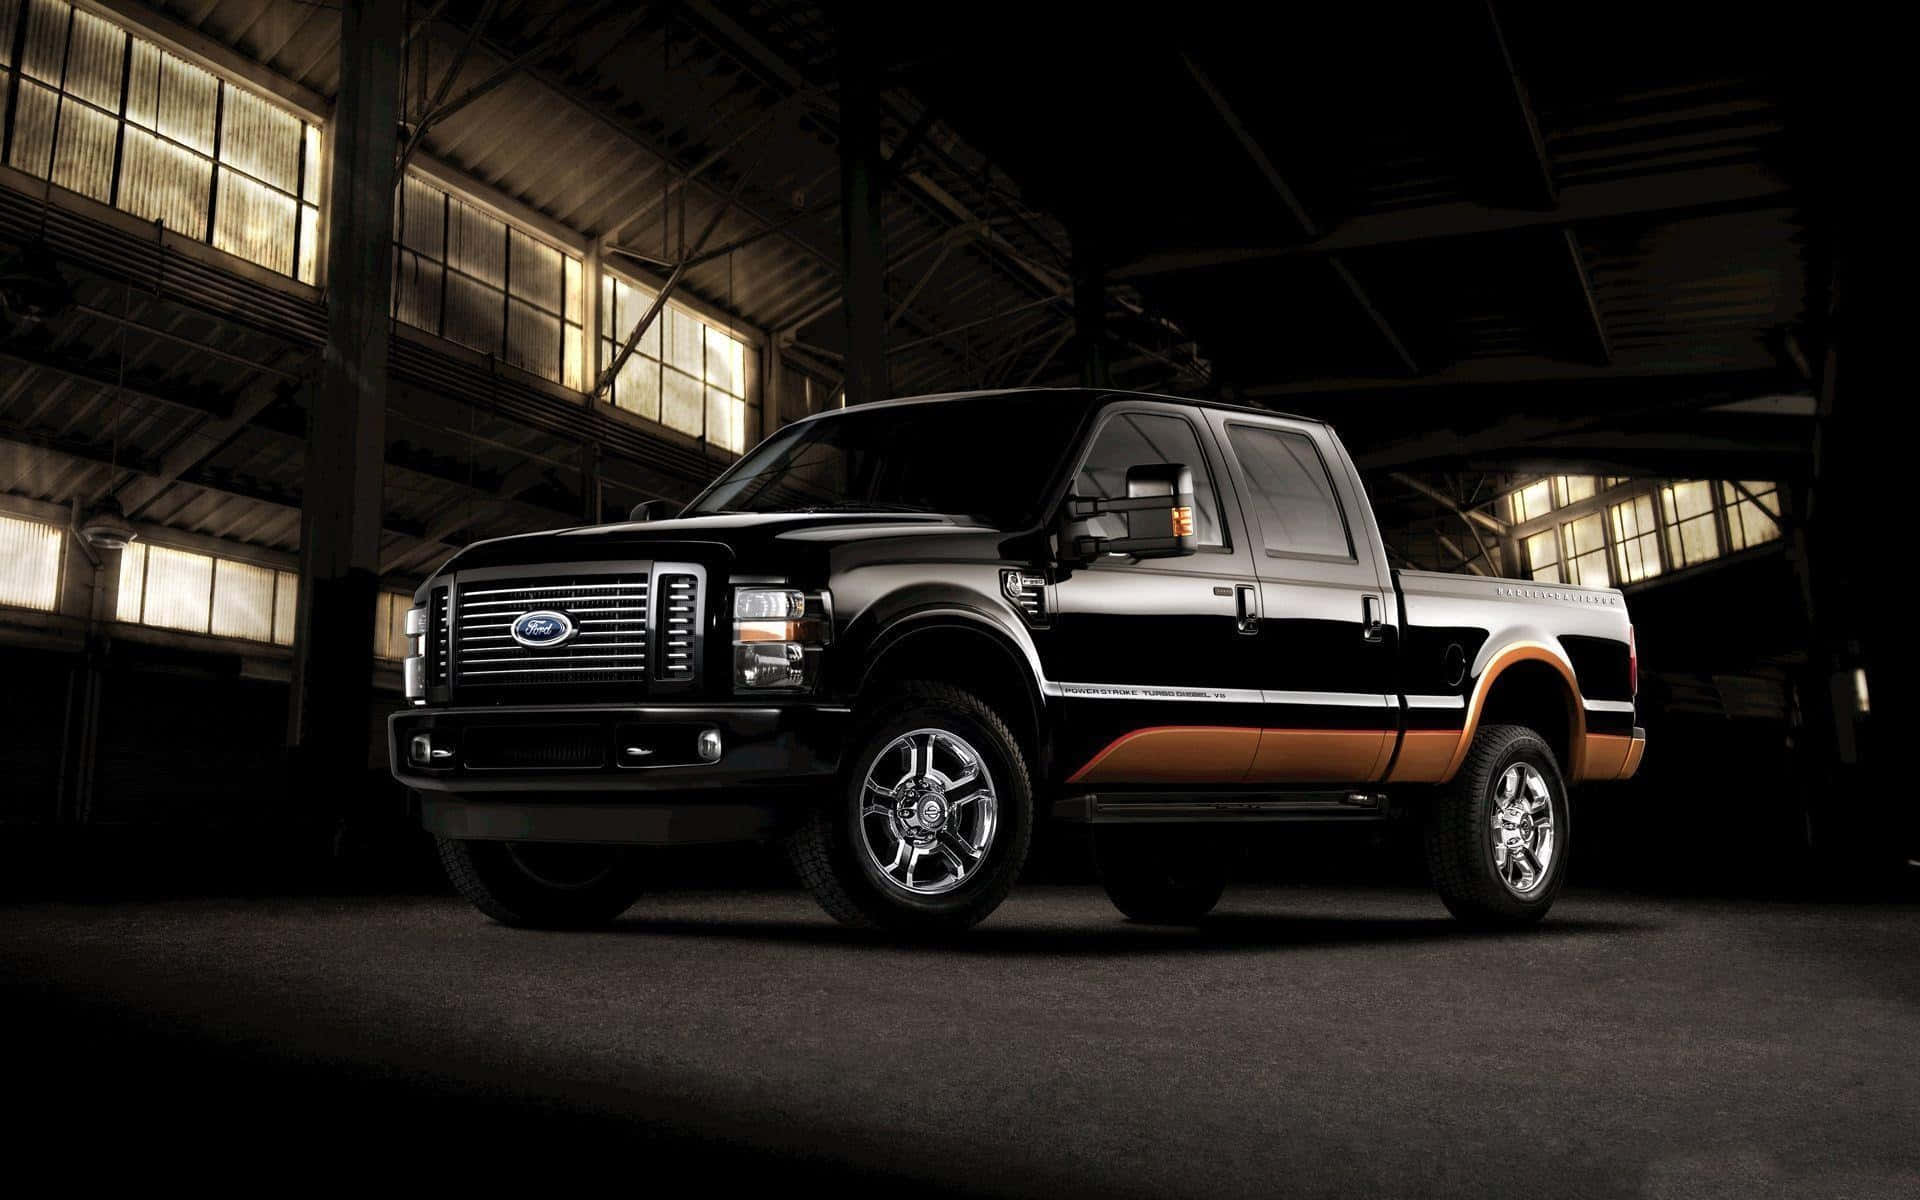 Get Prepped to Tear Up the Road with the Ford Powerstroke Wallpaper